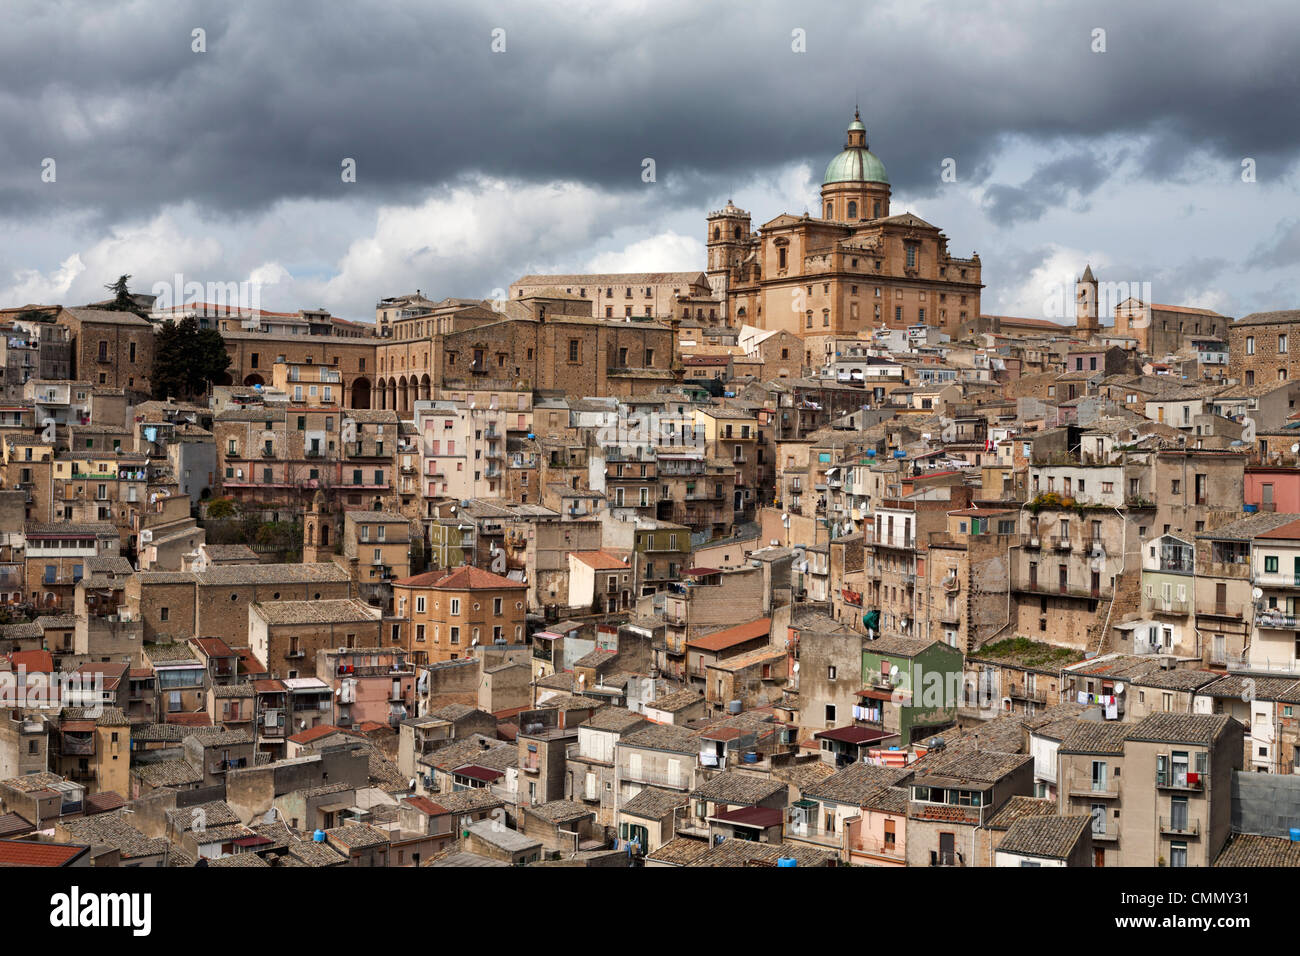 View over the old town, Piazza Armerina, Sicily, Italy, Europe Stock Photo